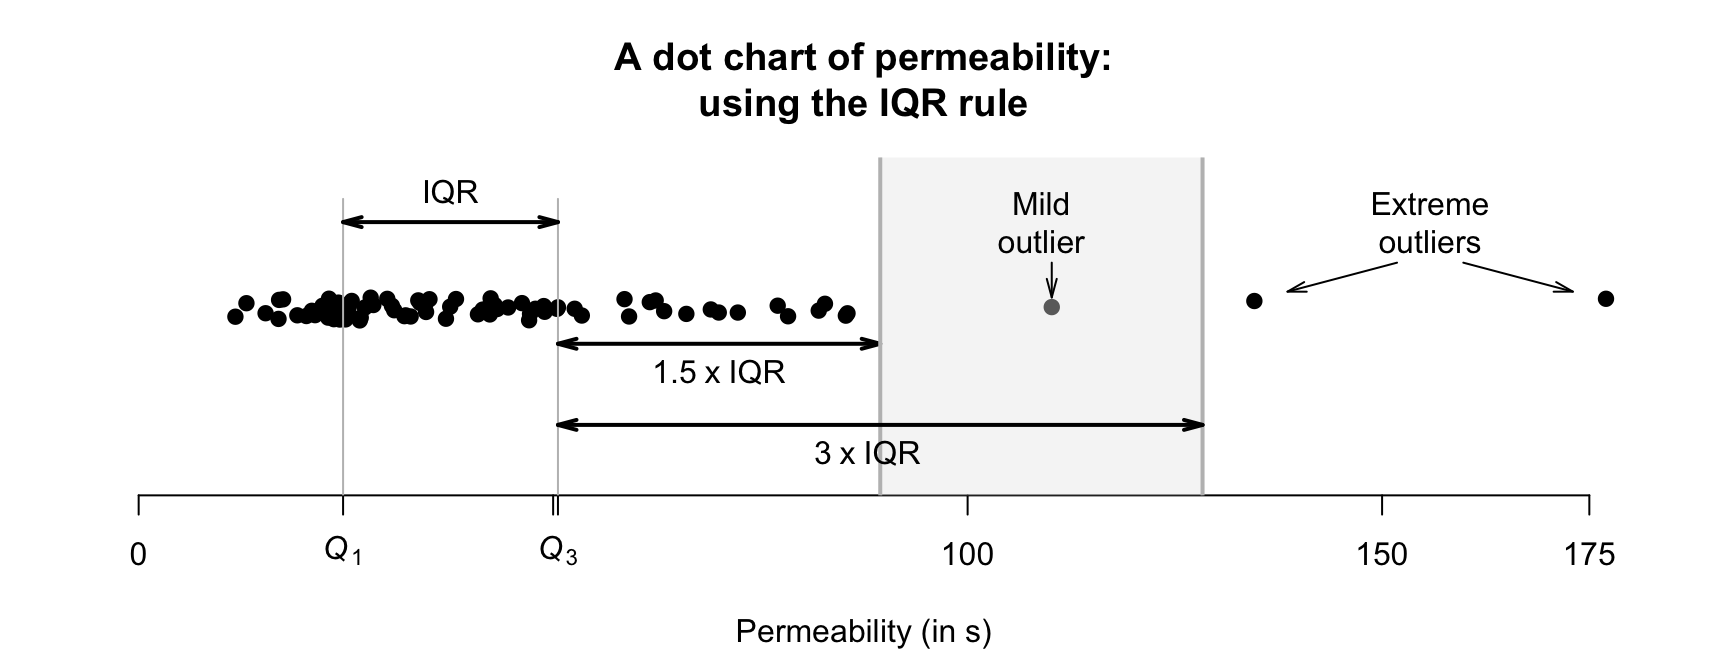 Mild and extreme outliers, using the IQR rule, for the permeability data